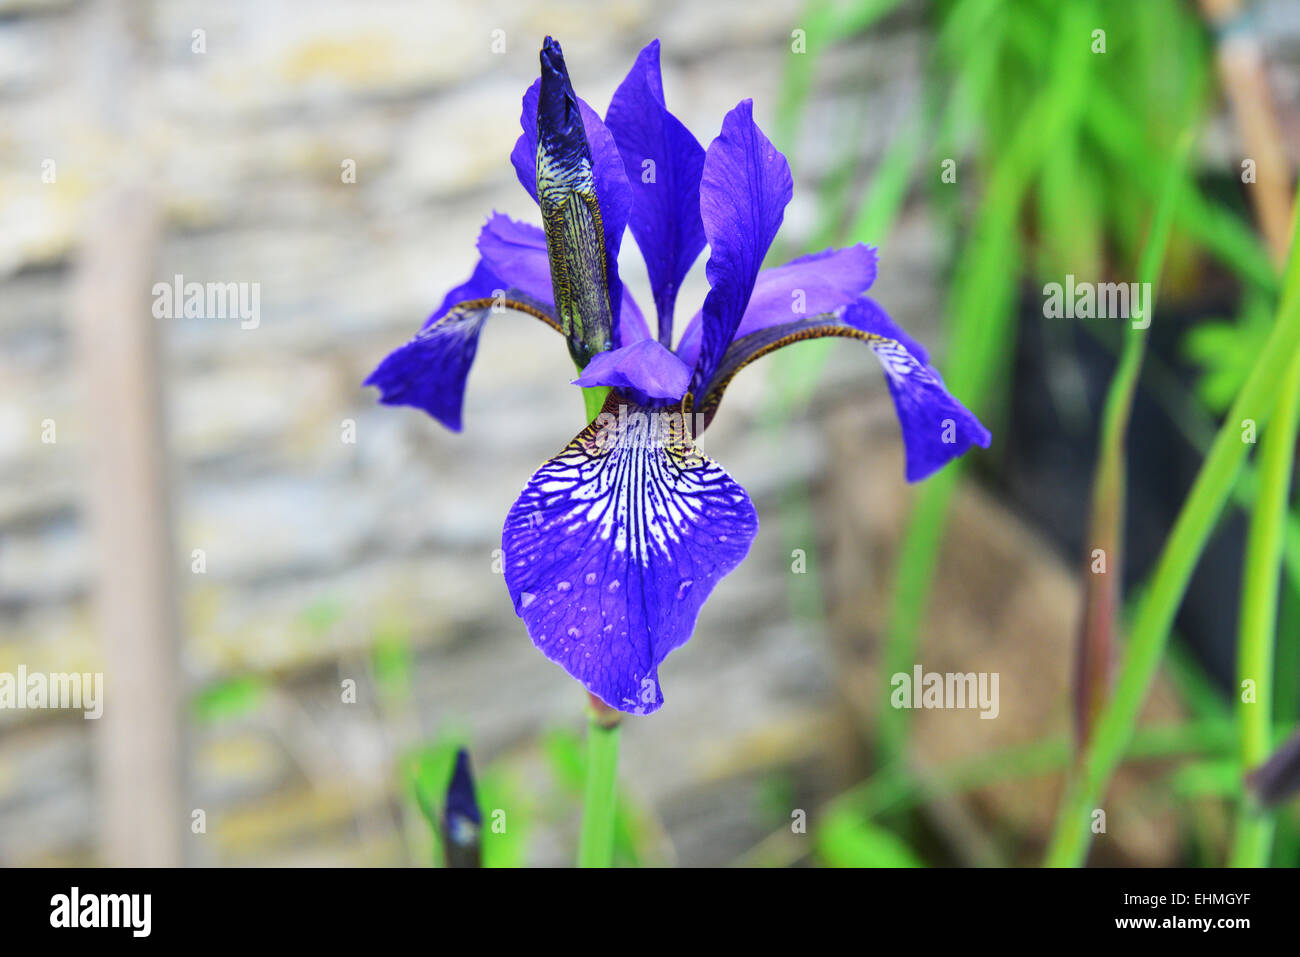 Blood red Iris, Iris sanguinea, Iridaceae. I know it's blue and not red, but it is called the Blood red Iris. Stock Photo